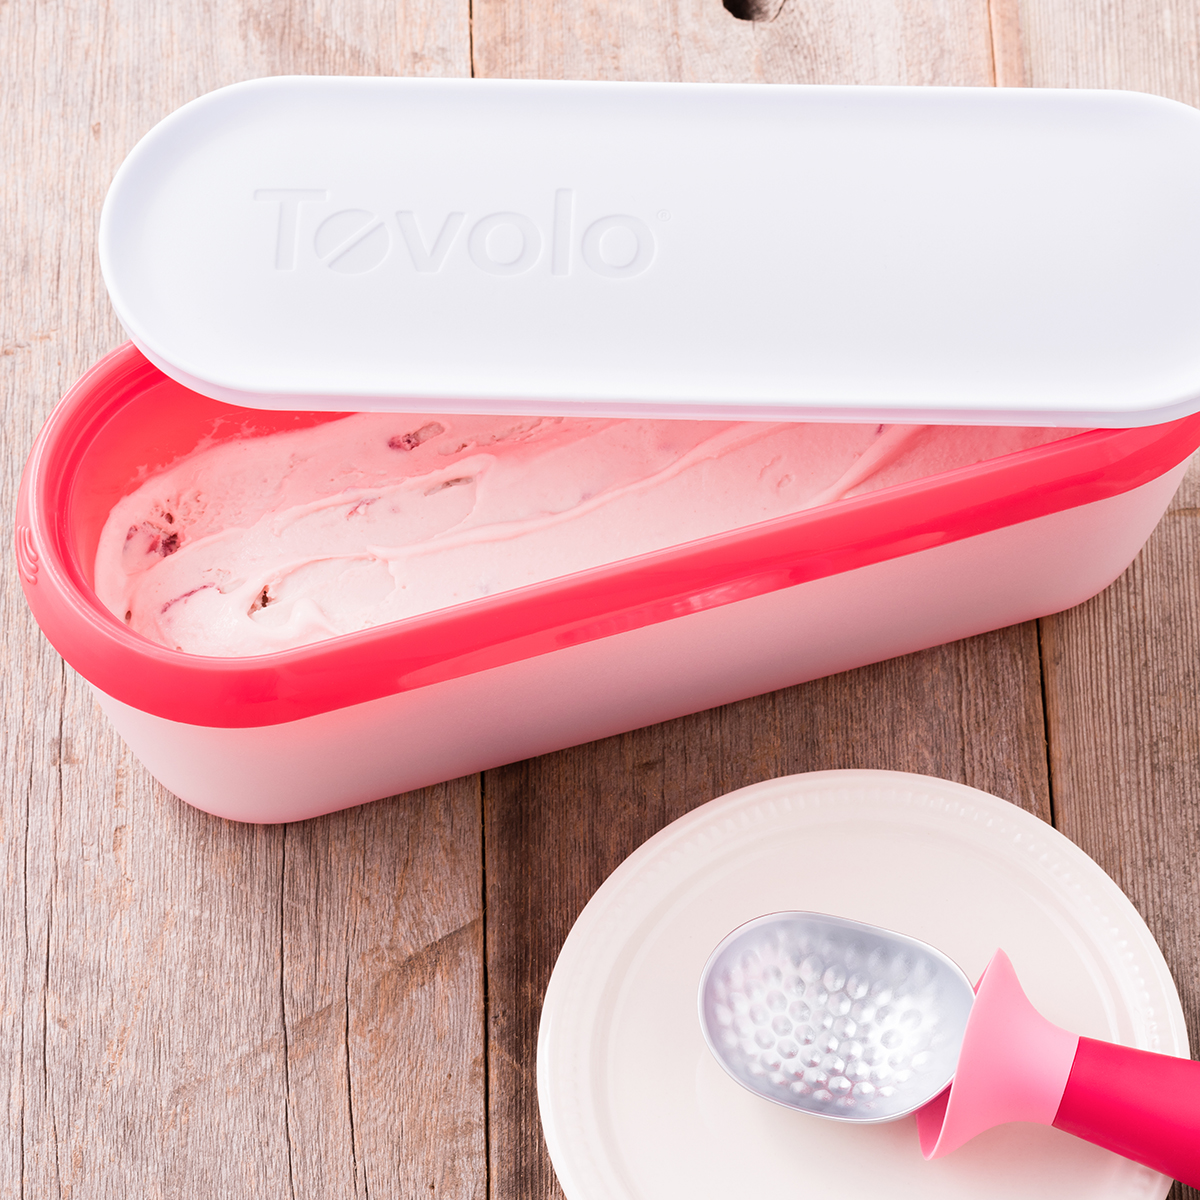 Tovolo 1.5 qt. White Glide-A-Scoop Ice Cream Tub, Insulated, Airtight  Reusable Freezer Container With Non-Slip Base 55002-000 - The Home Depot